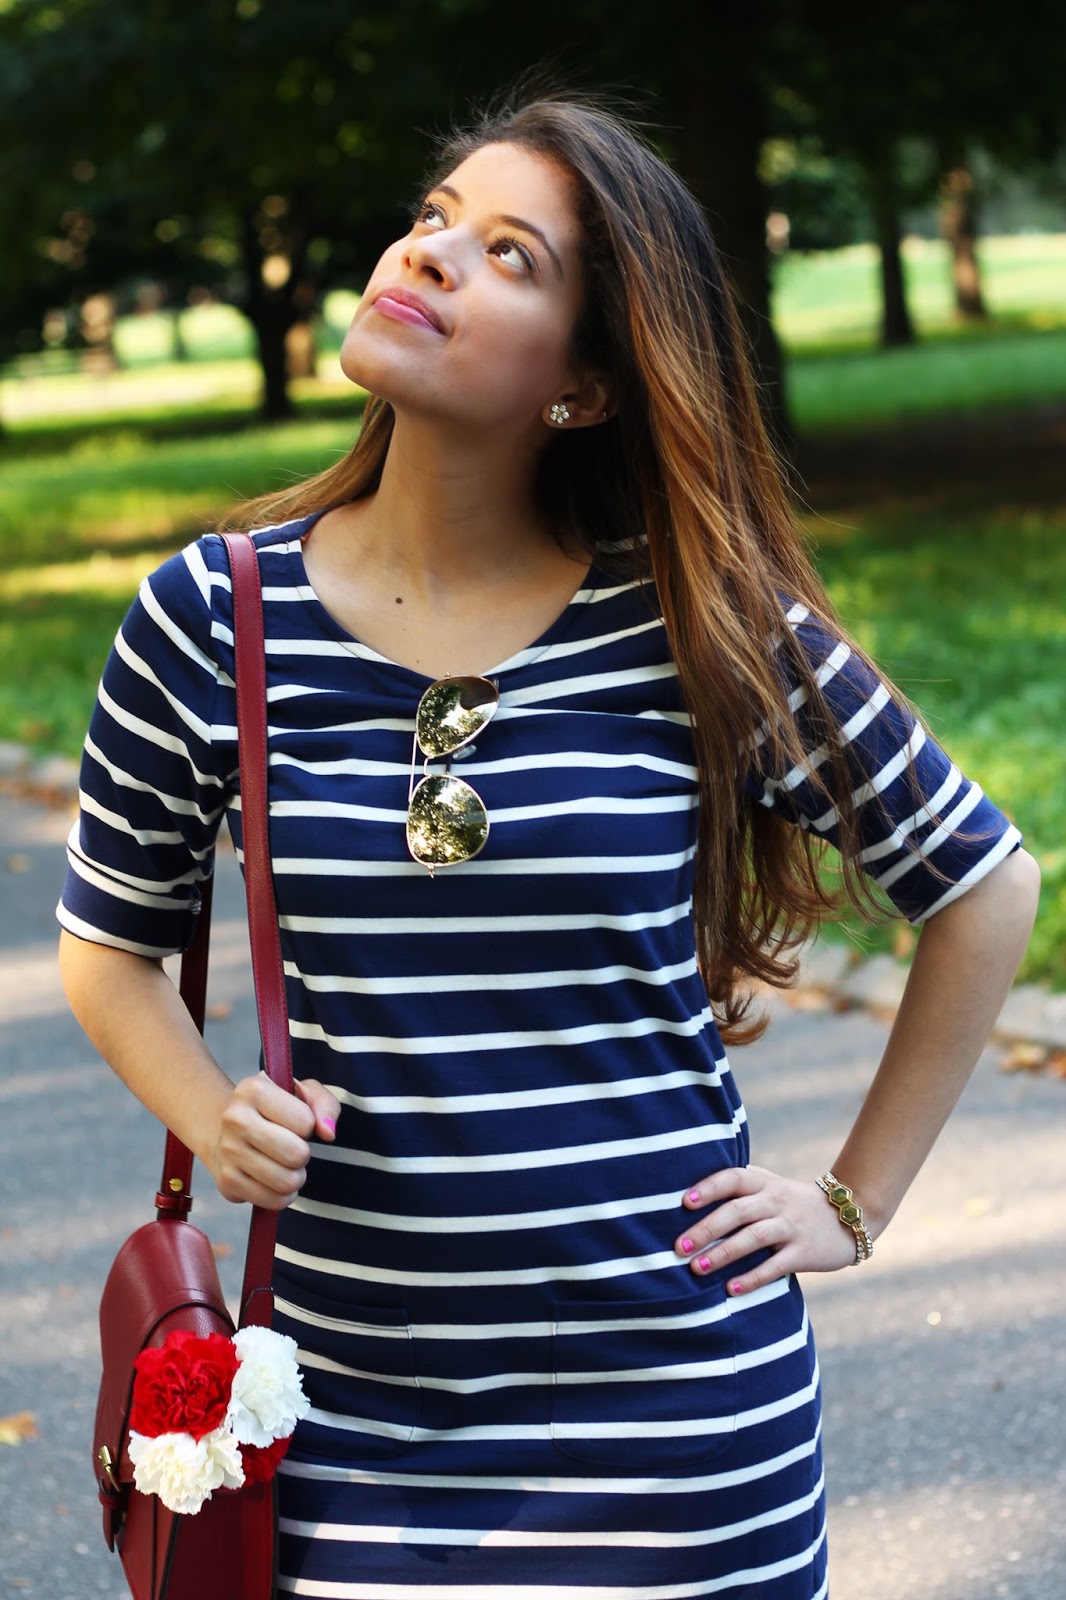 latina, girl, dominican, dominican blogger, fourth of july, 4th of july, july fourth, july 4th, american, patriotic, stars, stripes, red, white, blue, gold, holiday, summer, oldnavy, jack rogers, lovemyjacks, marshalls, fabfound, crew, hm, aldo, accessories, aldo accessories,fun, cool, fashion, blogger, petite, woman, teen, women, outfit, ootd, american flag, sandals, dress, navy blue dress with white stripes, bracelets, purse, new york, weekend, friday, tgif, niece, ny, new york city, style, inspo, park, july